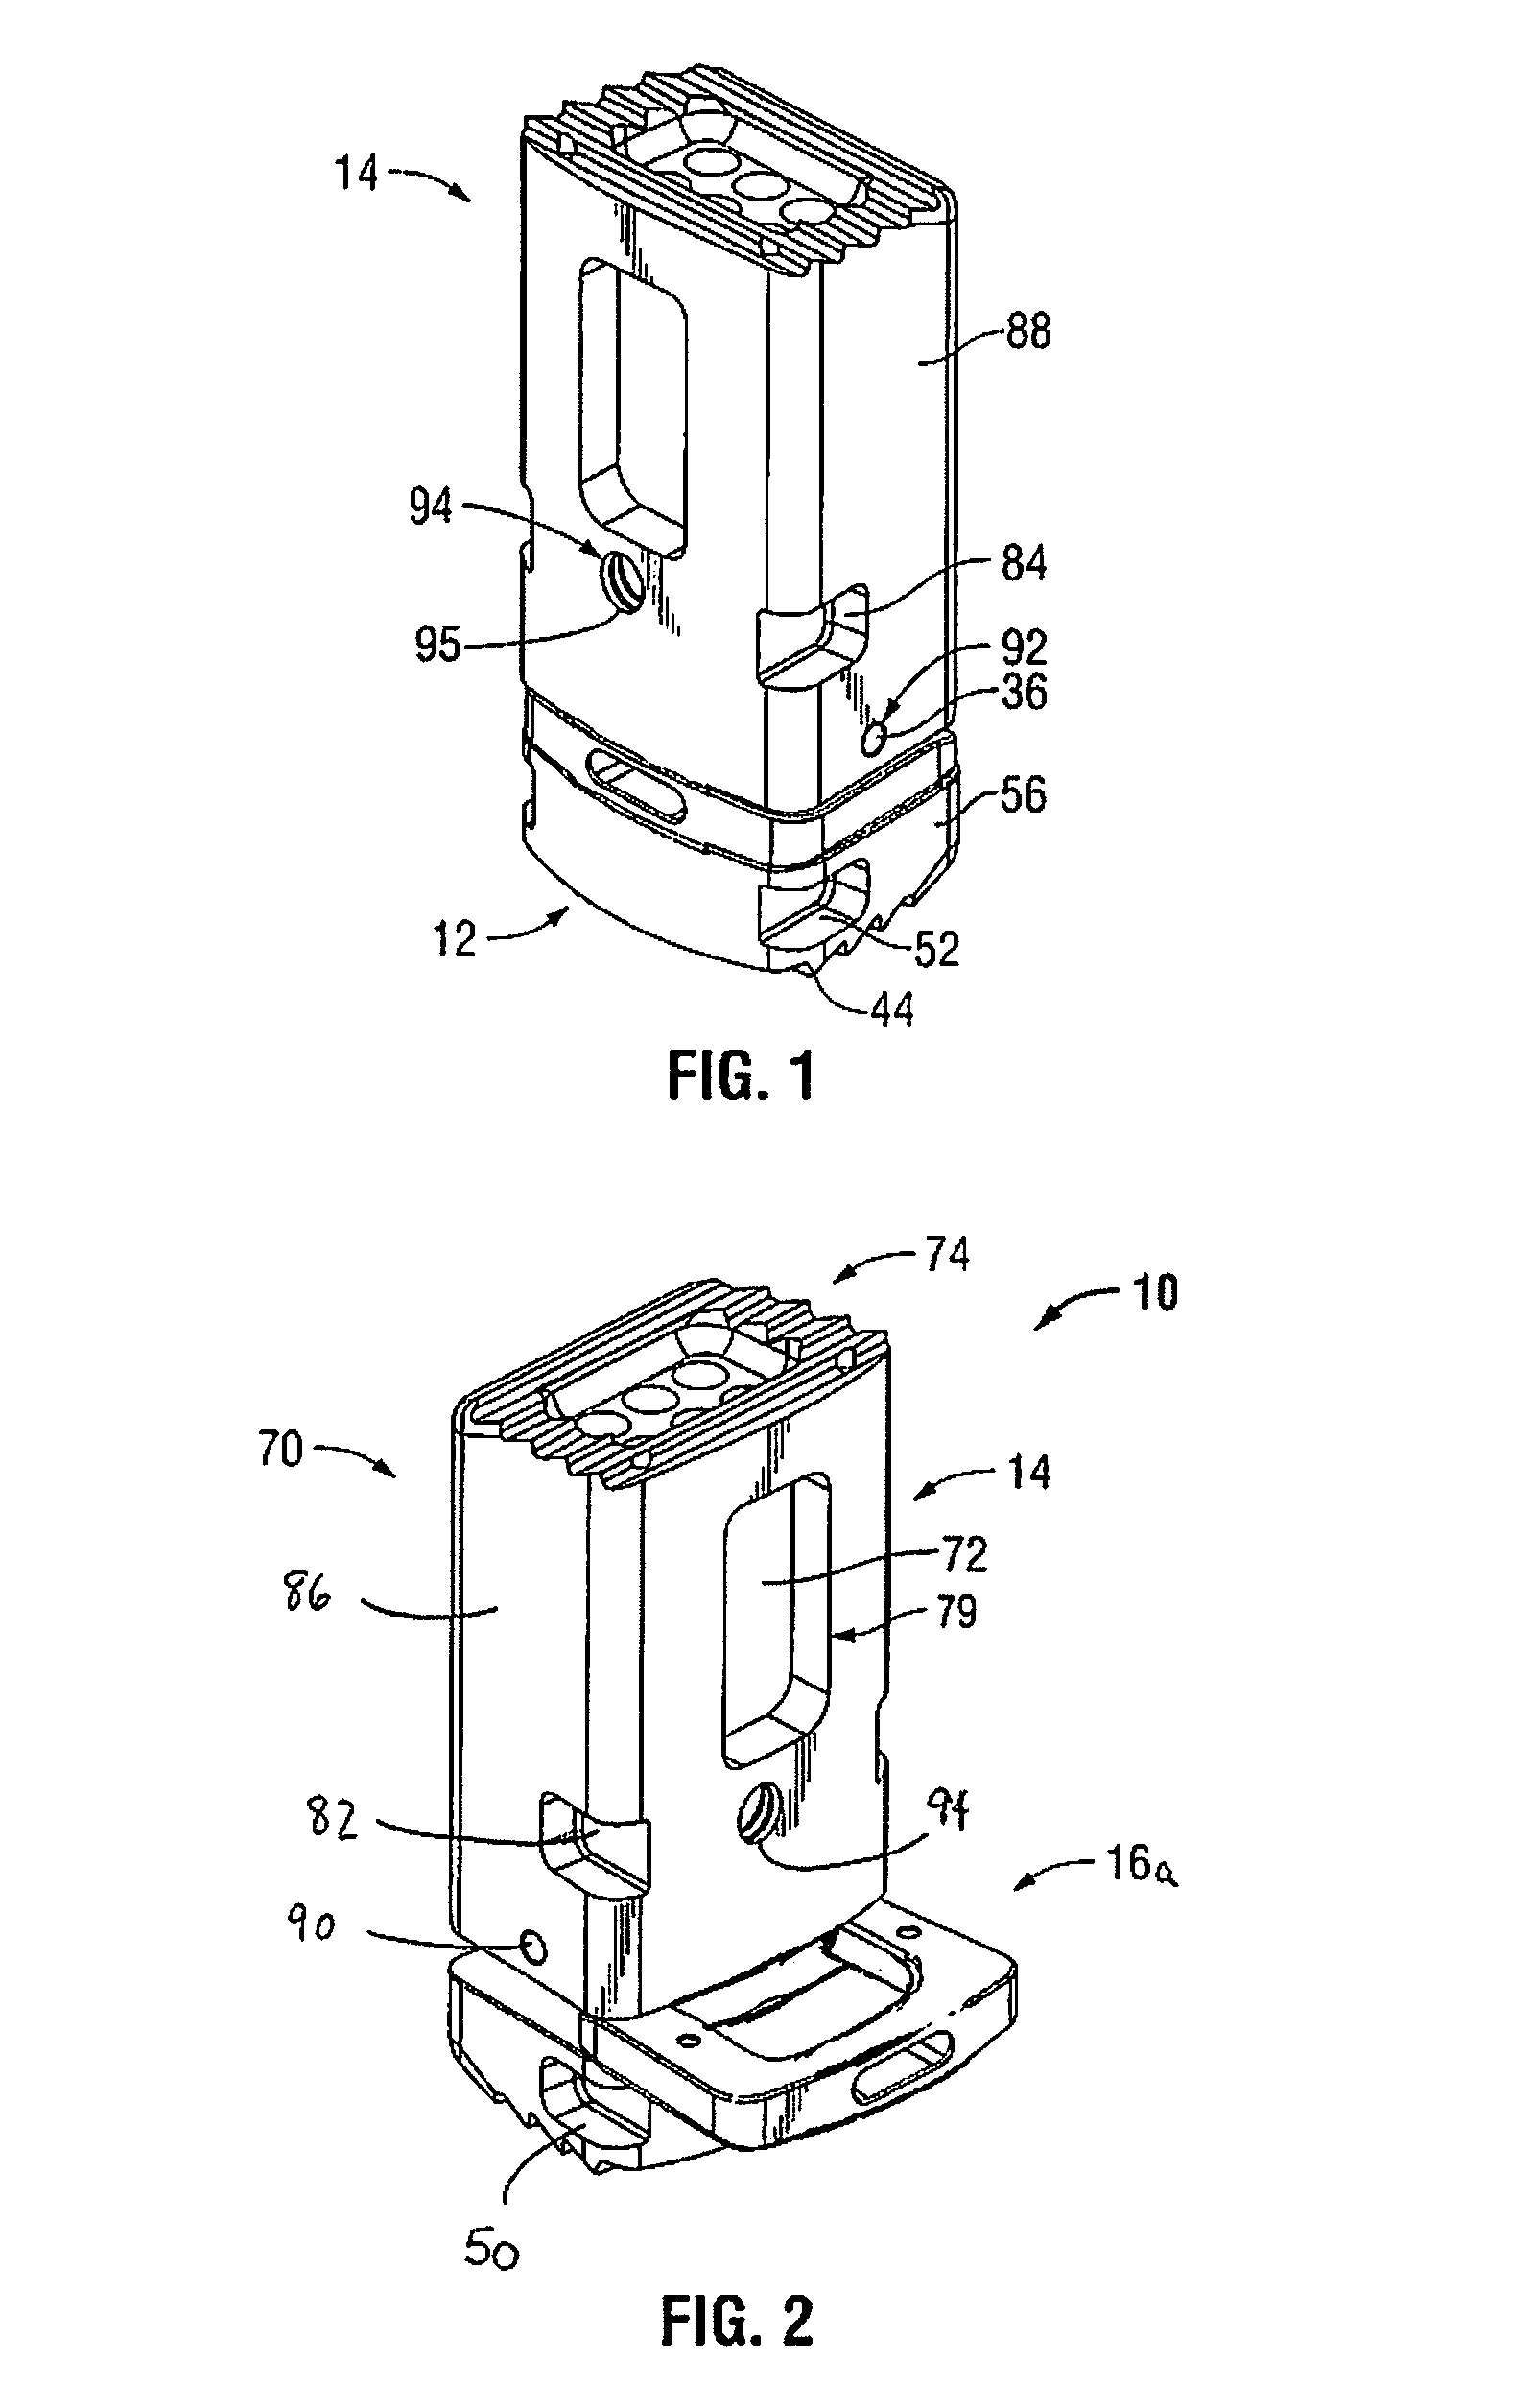 Expandable cage with locking device